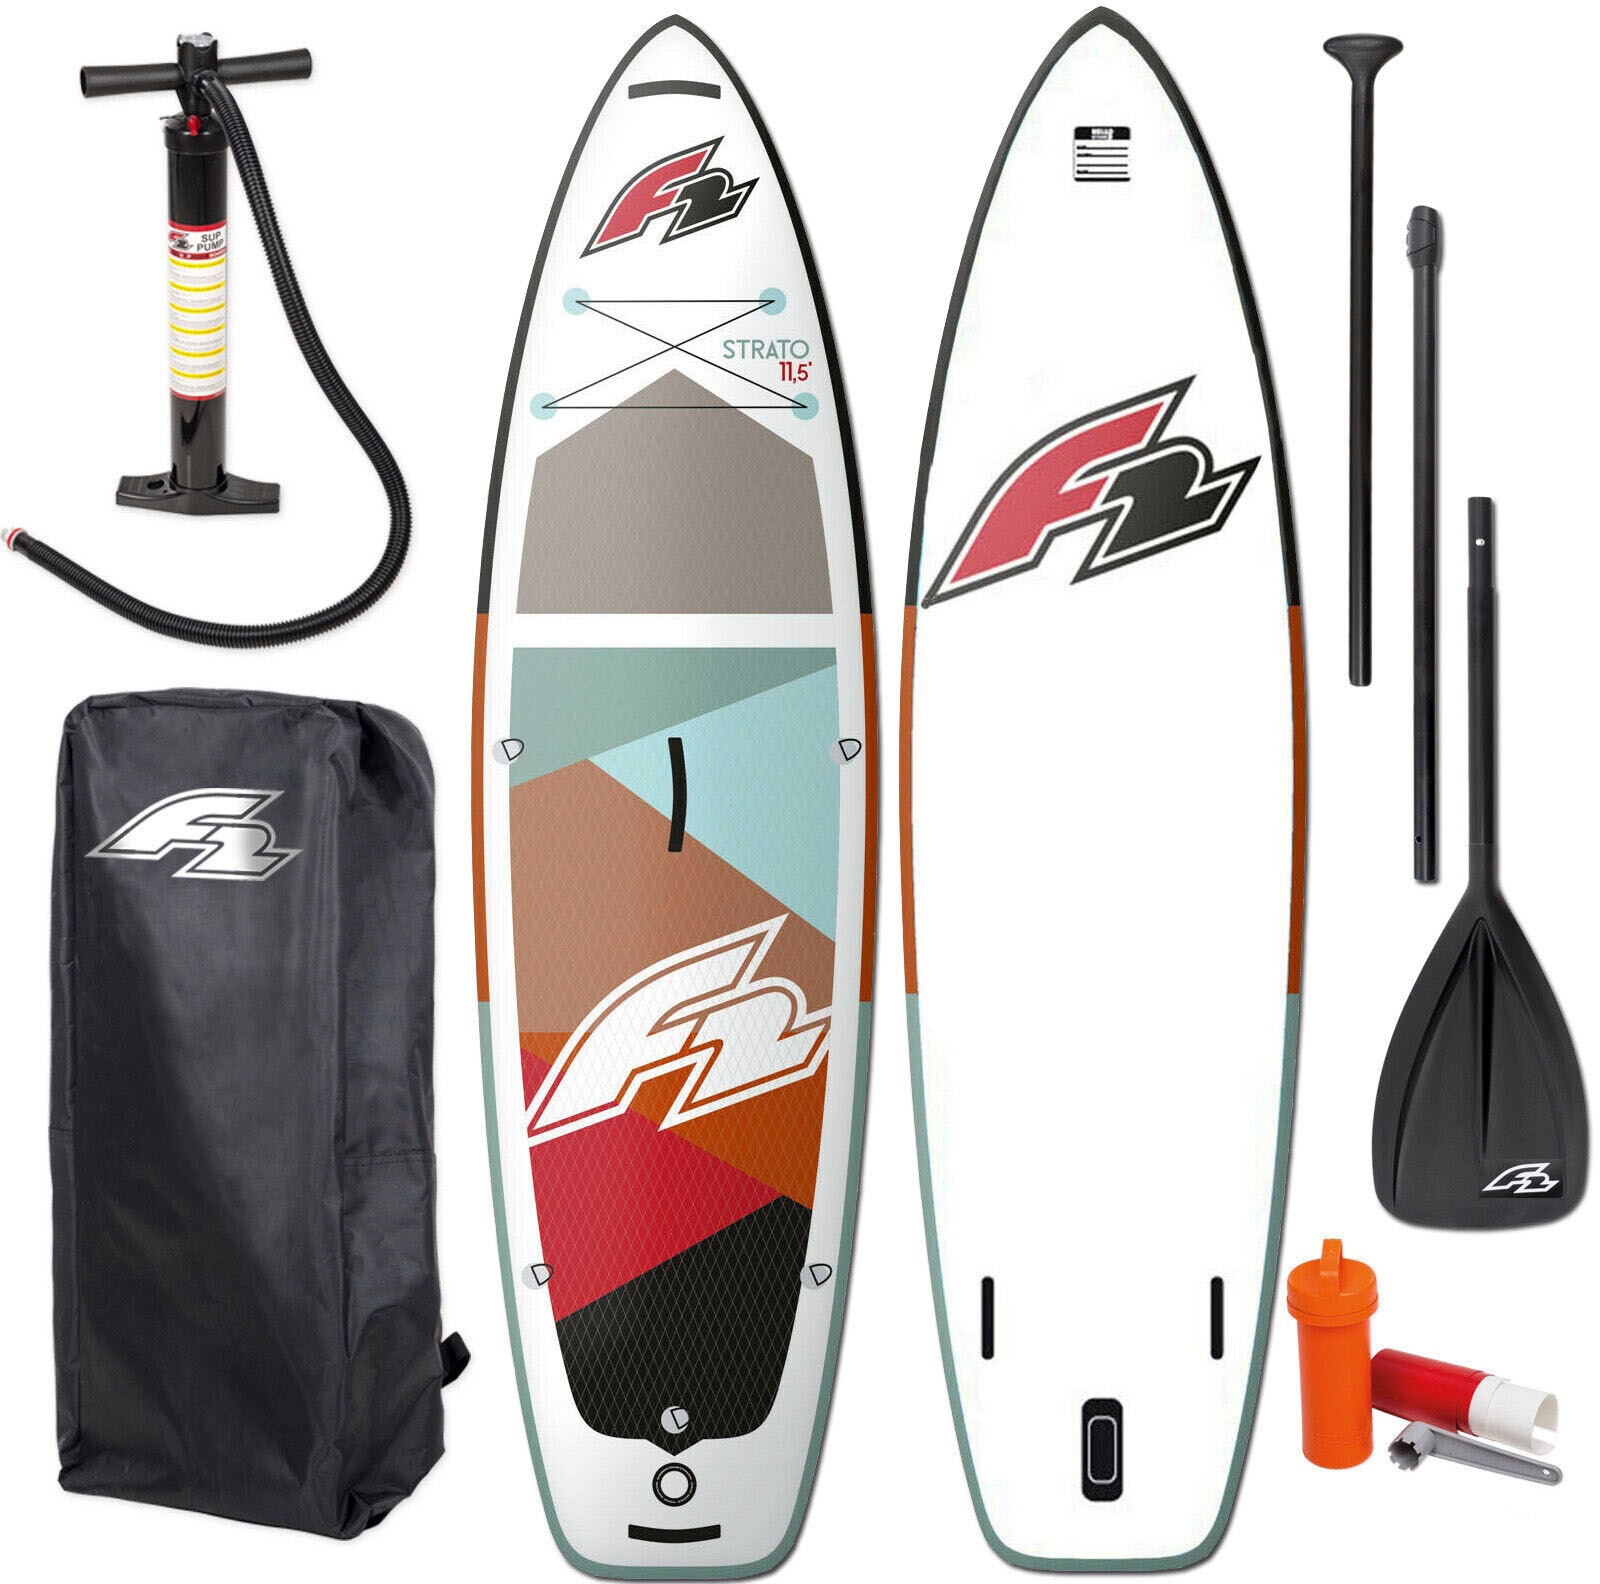 F2 Inflatable SUP-Board 5 tlg.) (Packung, red«, Online 10,5 Shop women im OTTO kaufen »Strato